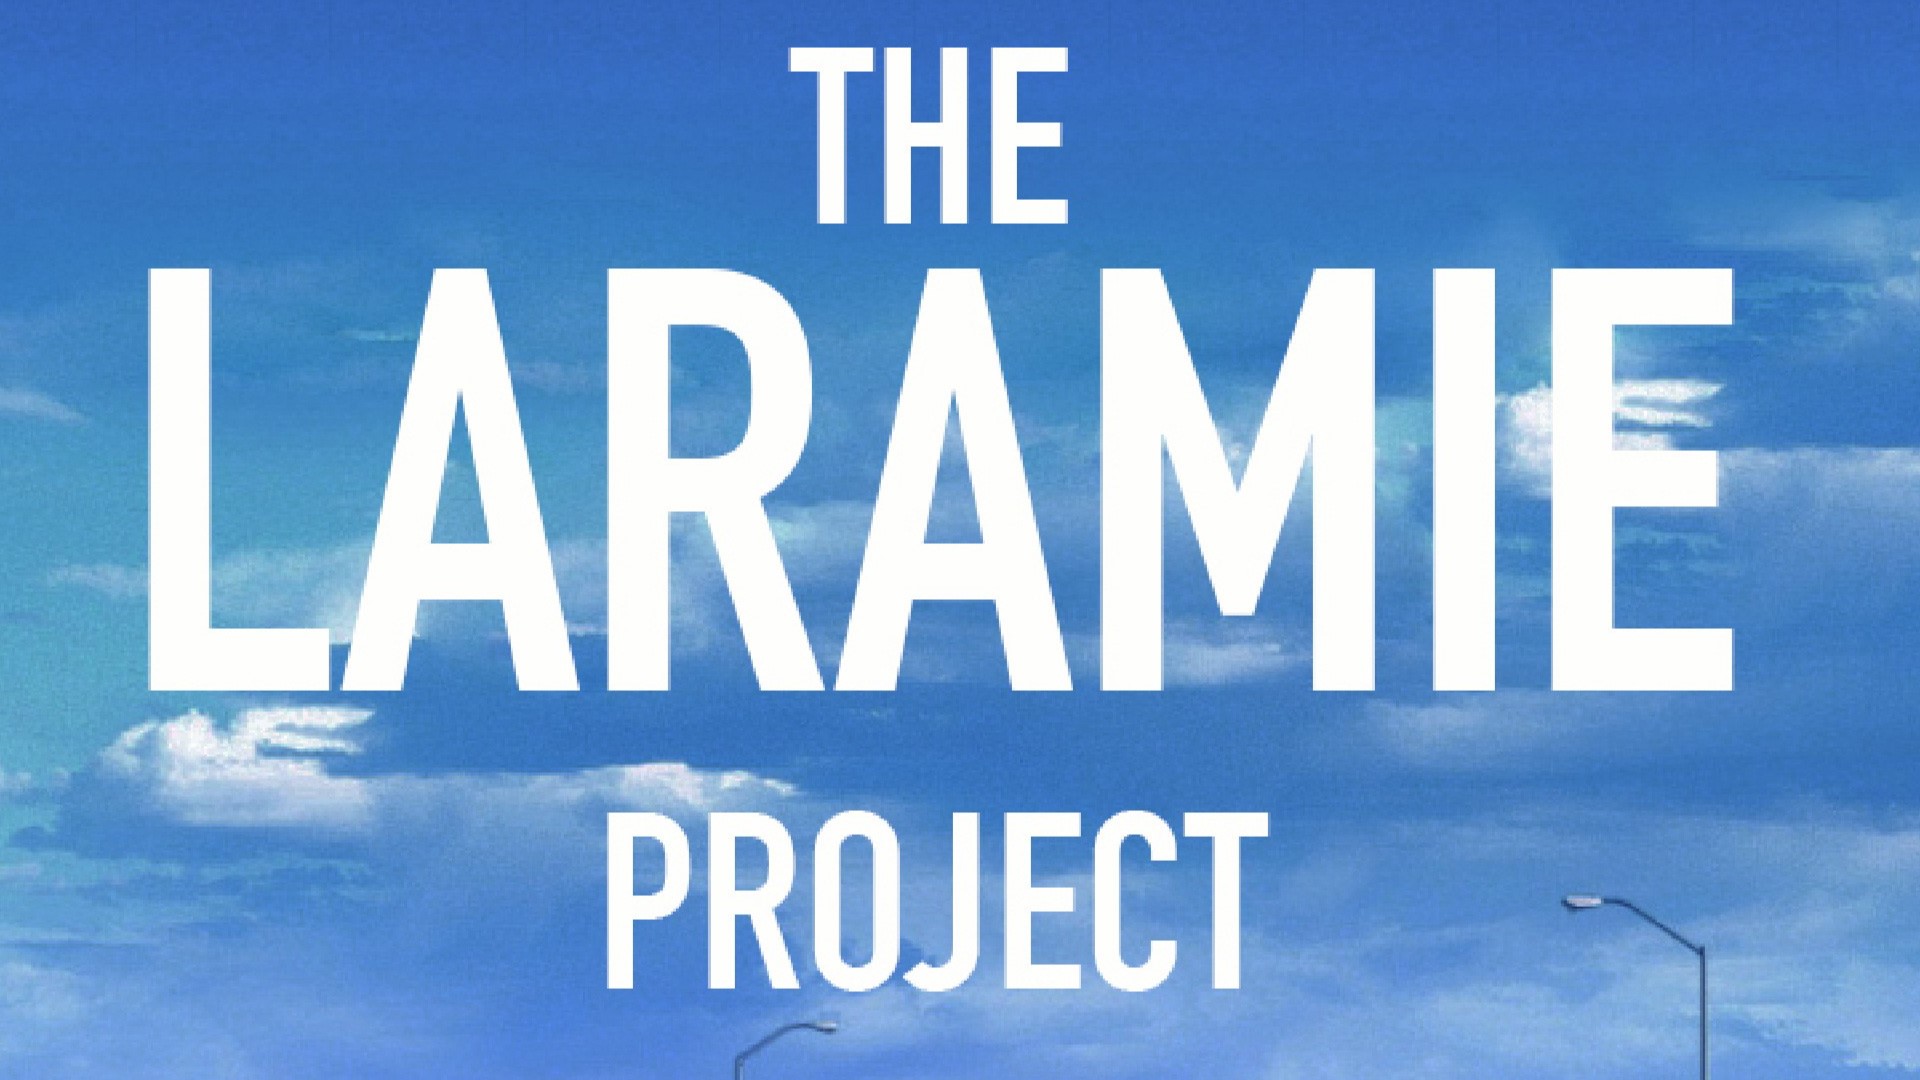 Greely High School in Cumberland is live-streaming its performance of The Laramie Project Dec. 18 - 20.